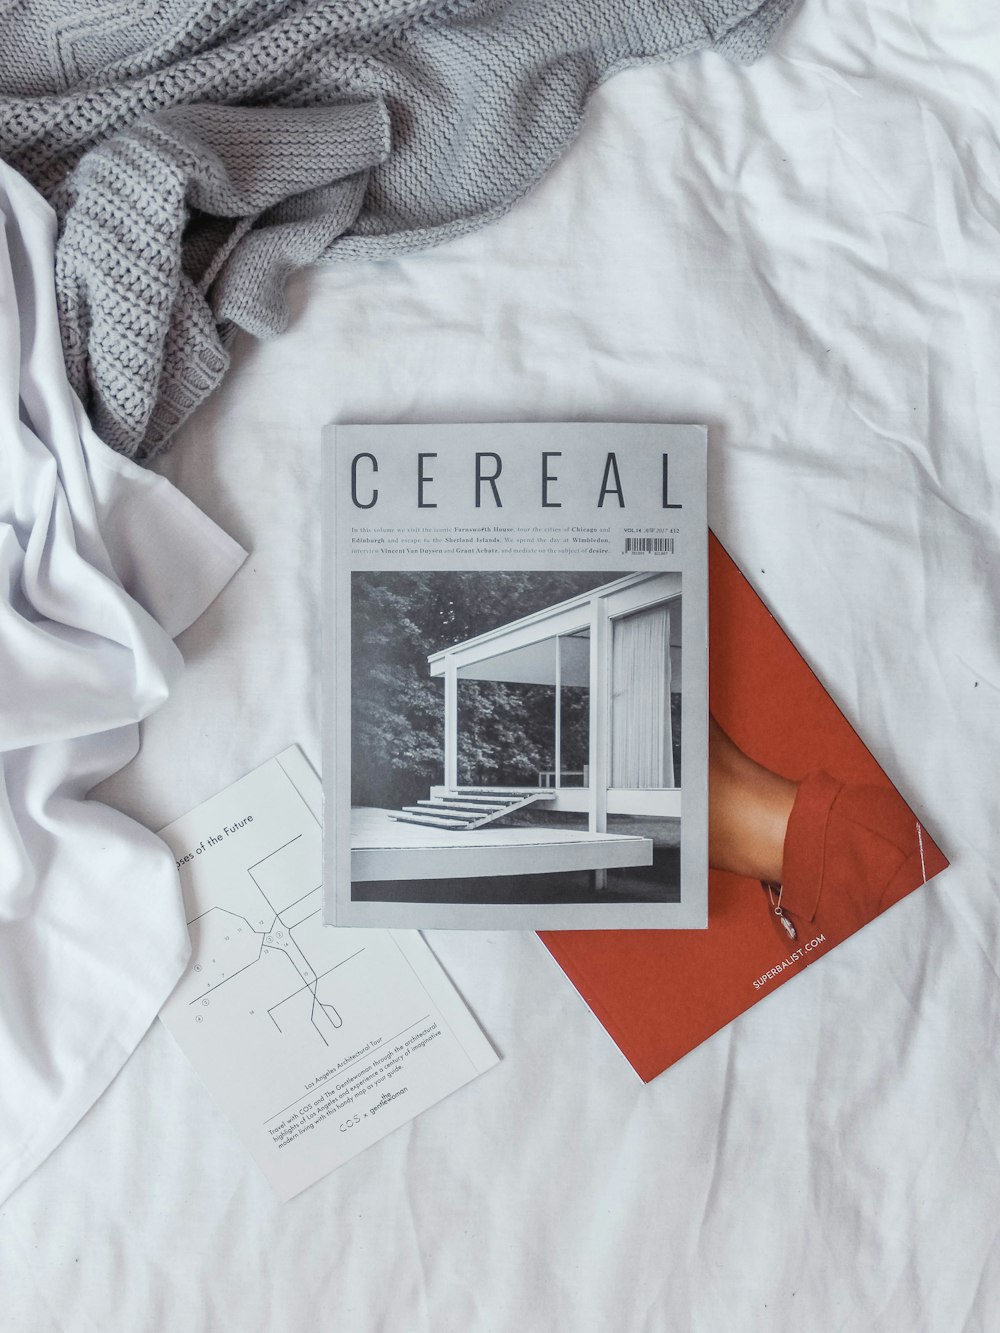 Cereal book on white textile